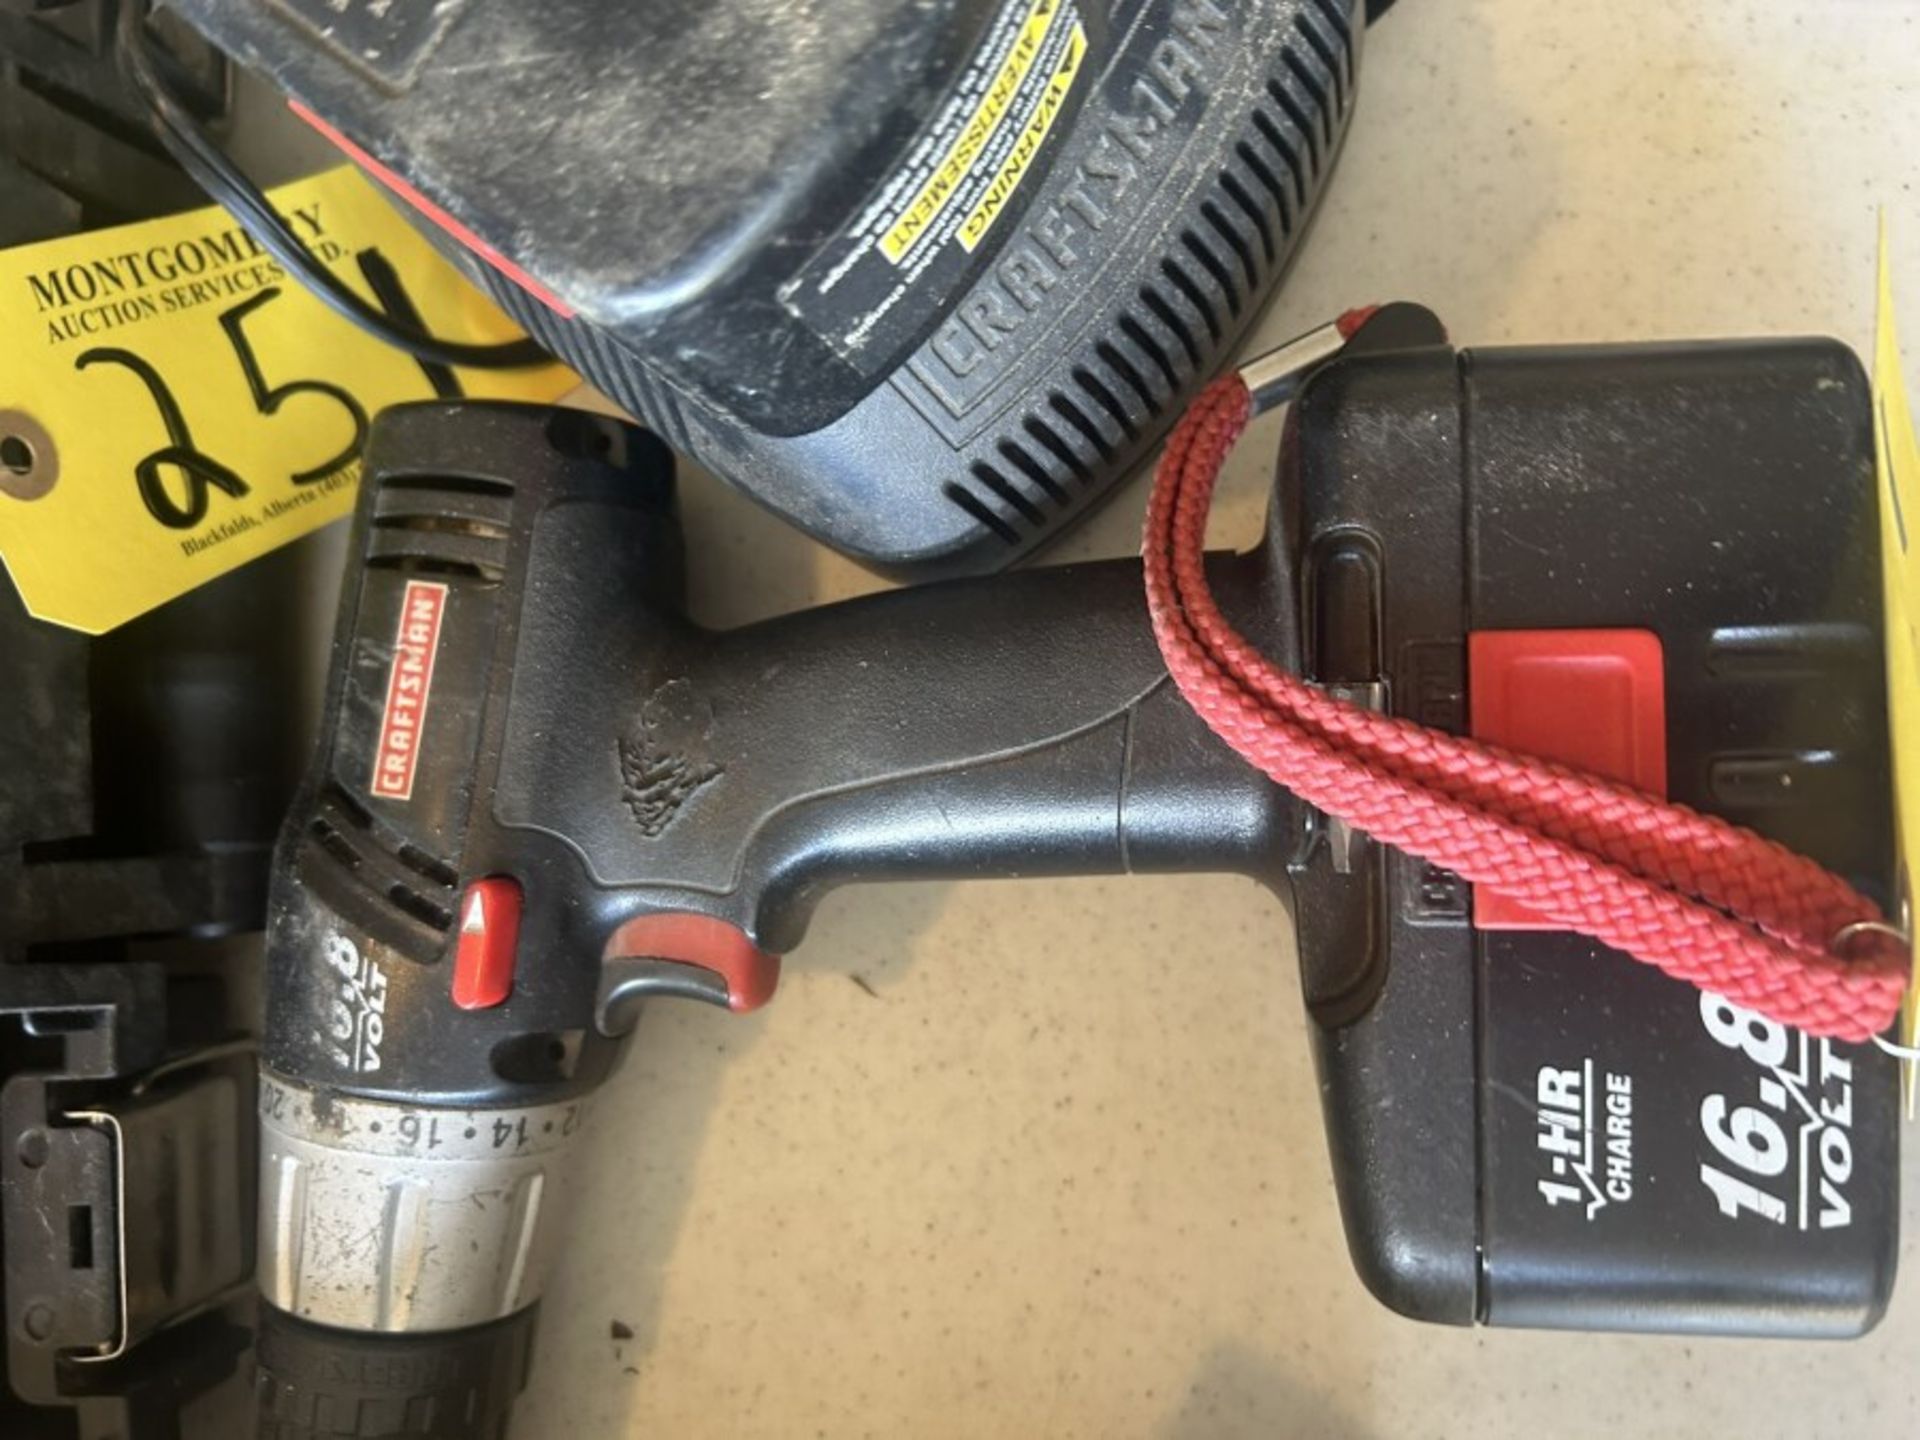 DEWALT 12V CORDLESS DRILL AND CRAFTSMAN CORDLESS DRILL W/ BATTERIES AND CHARGERS - Image 4 of 5